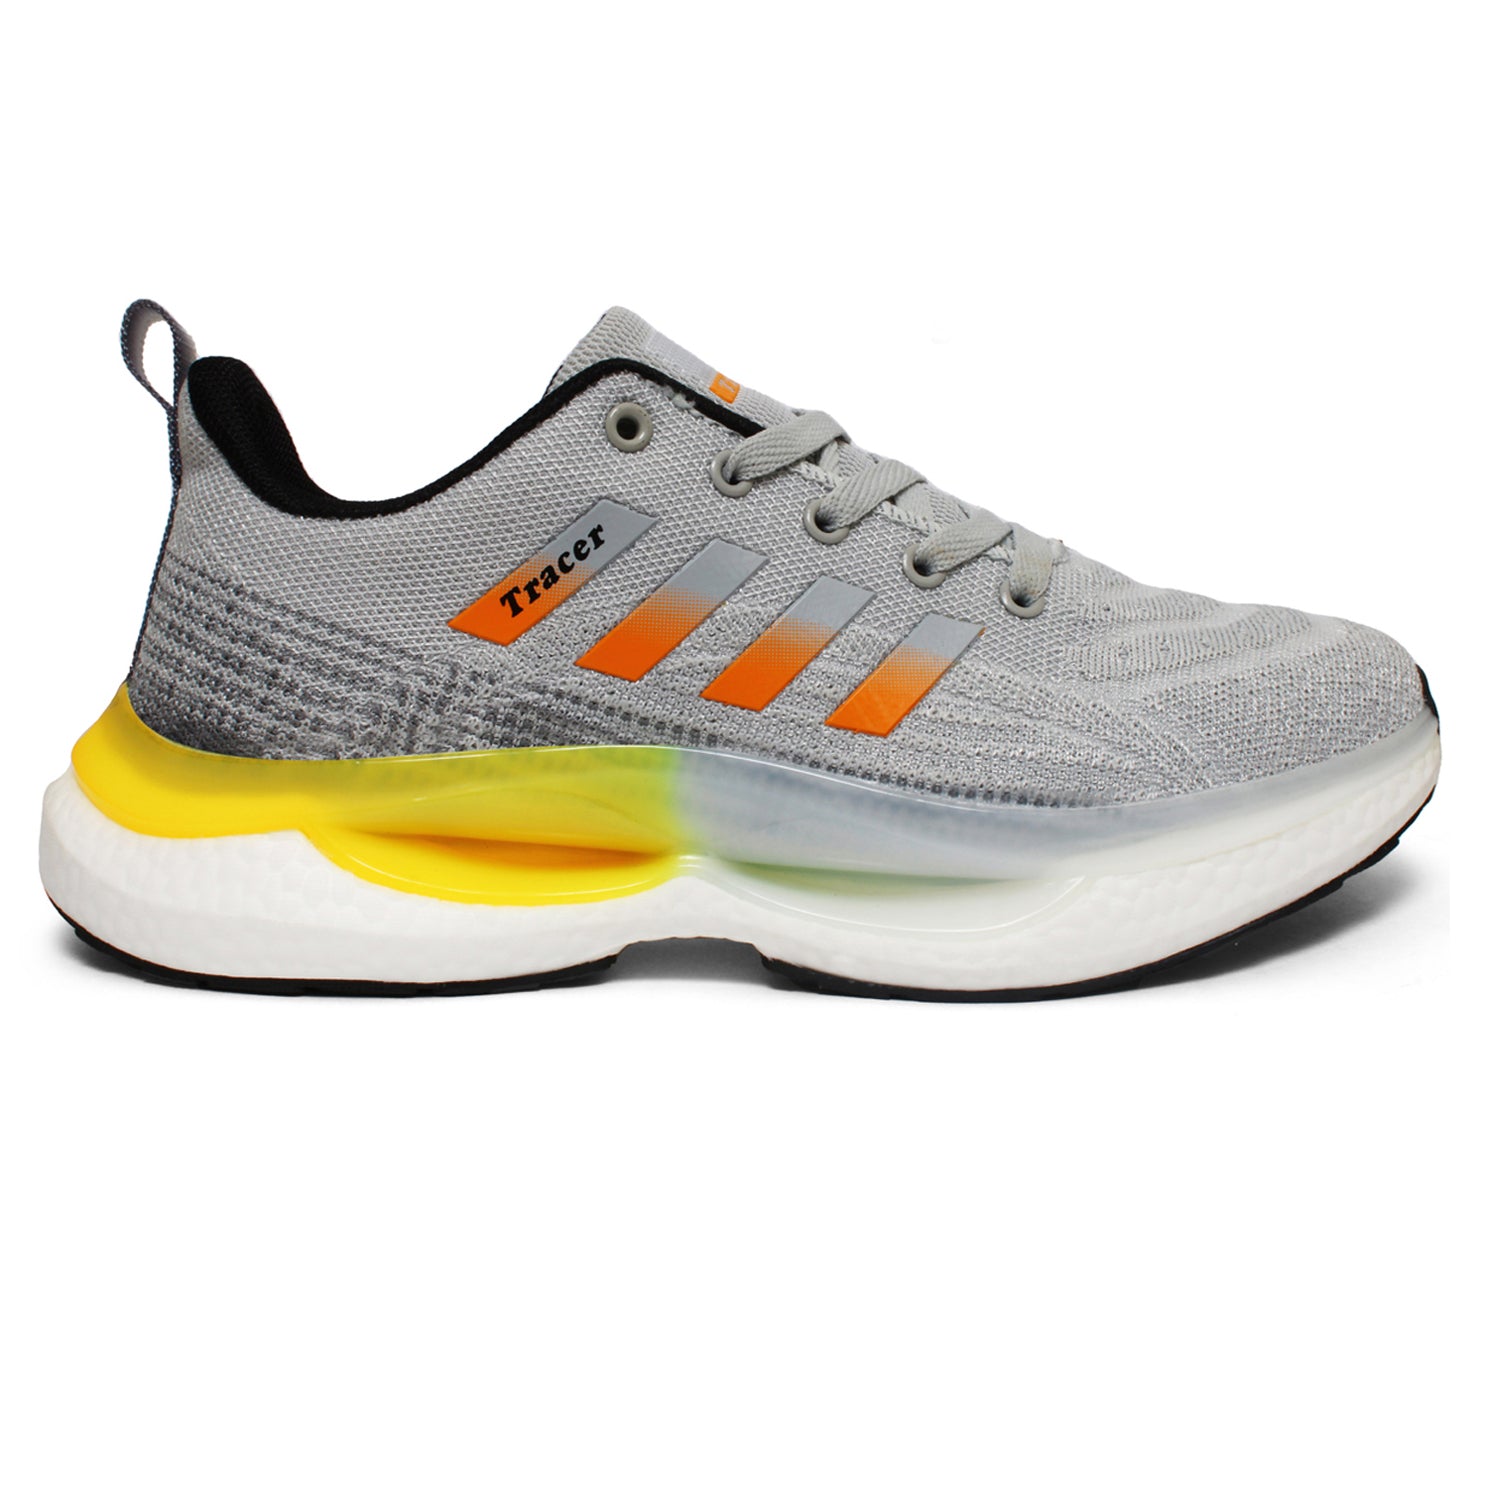 Tracer Conquer 2625 Men's Sneaker Grey Yellow